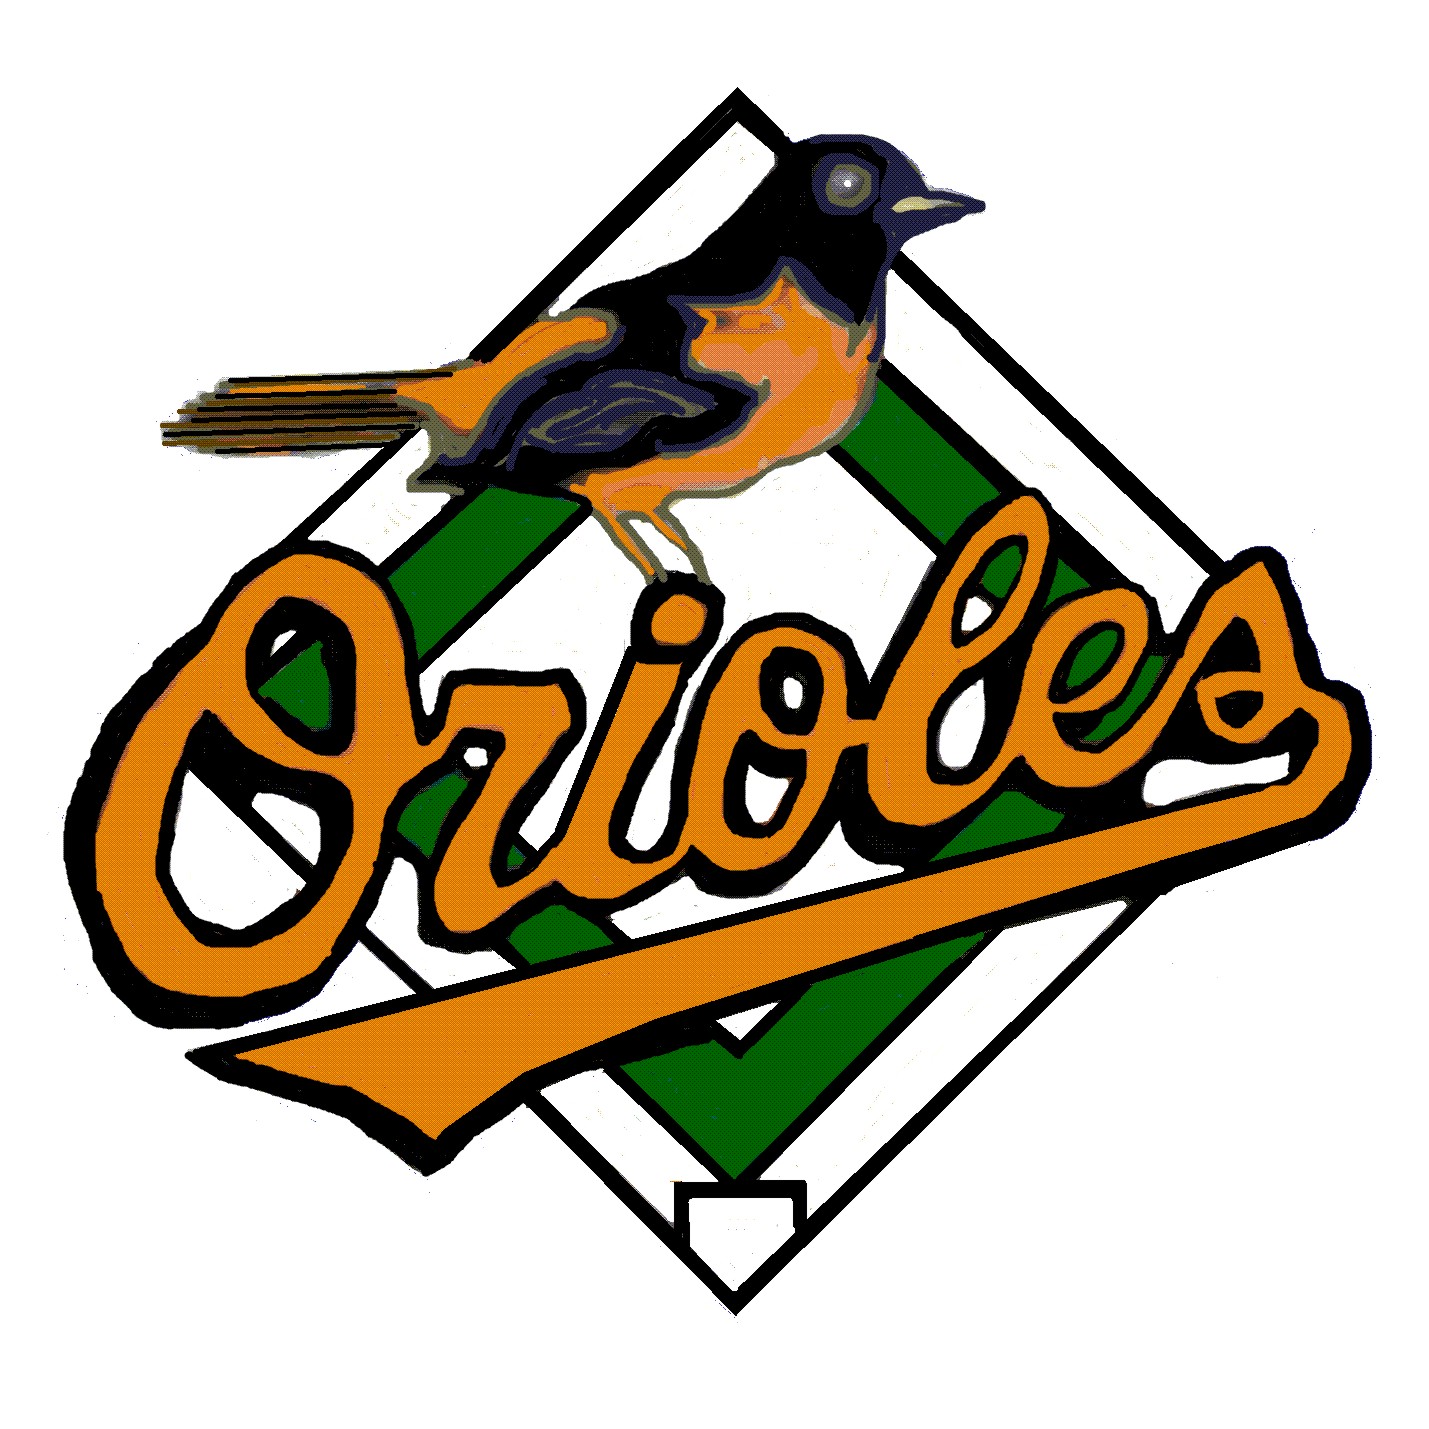 Baltimore Orioles - ‪The names in our lineup graphic are in Braille  lettering in recognition of National Federation of the Blind Night at Oriole  Park. ‬ ‪Dylan Bundy is on the mound‬